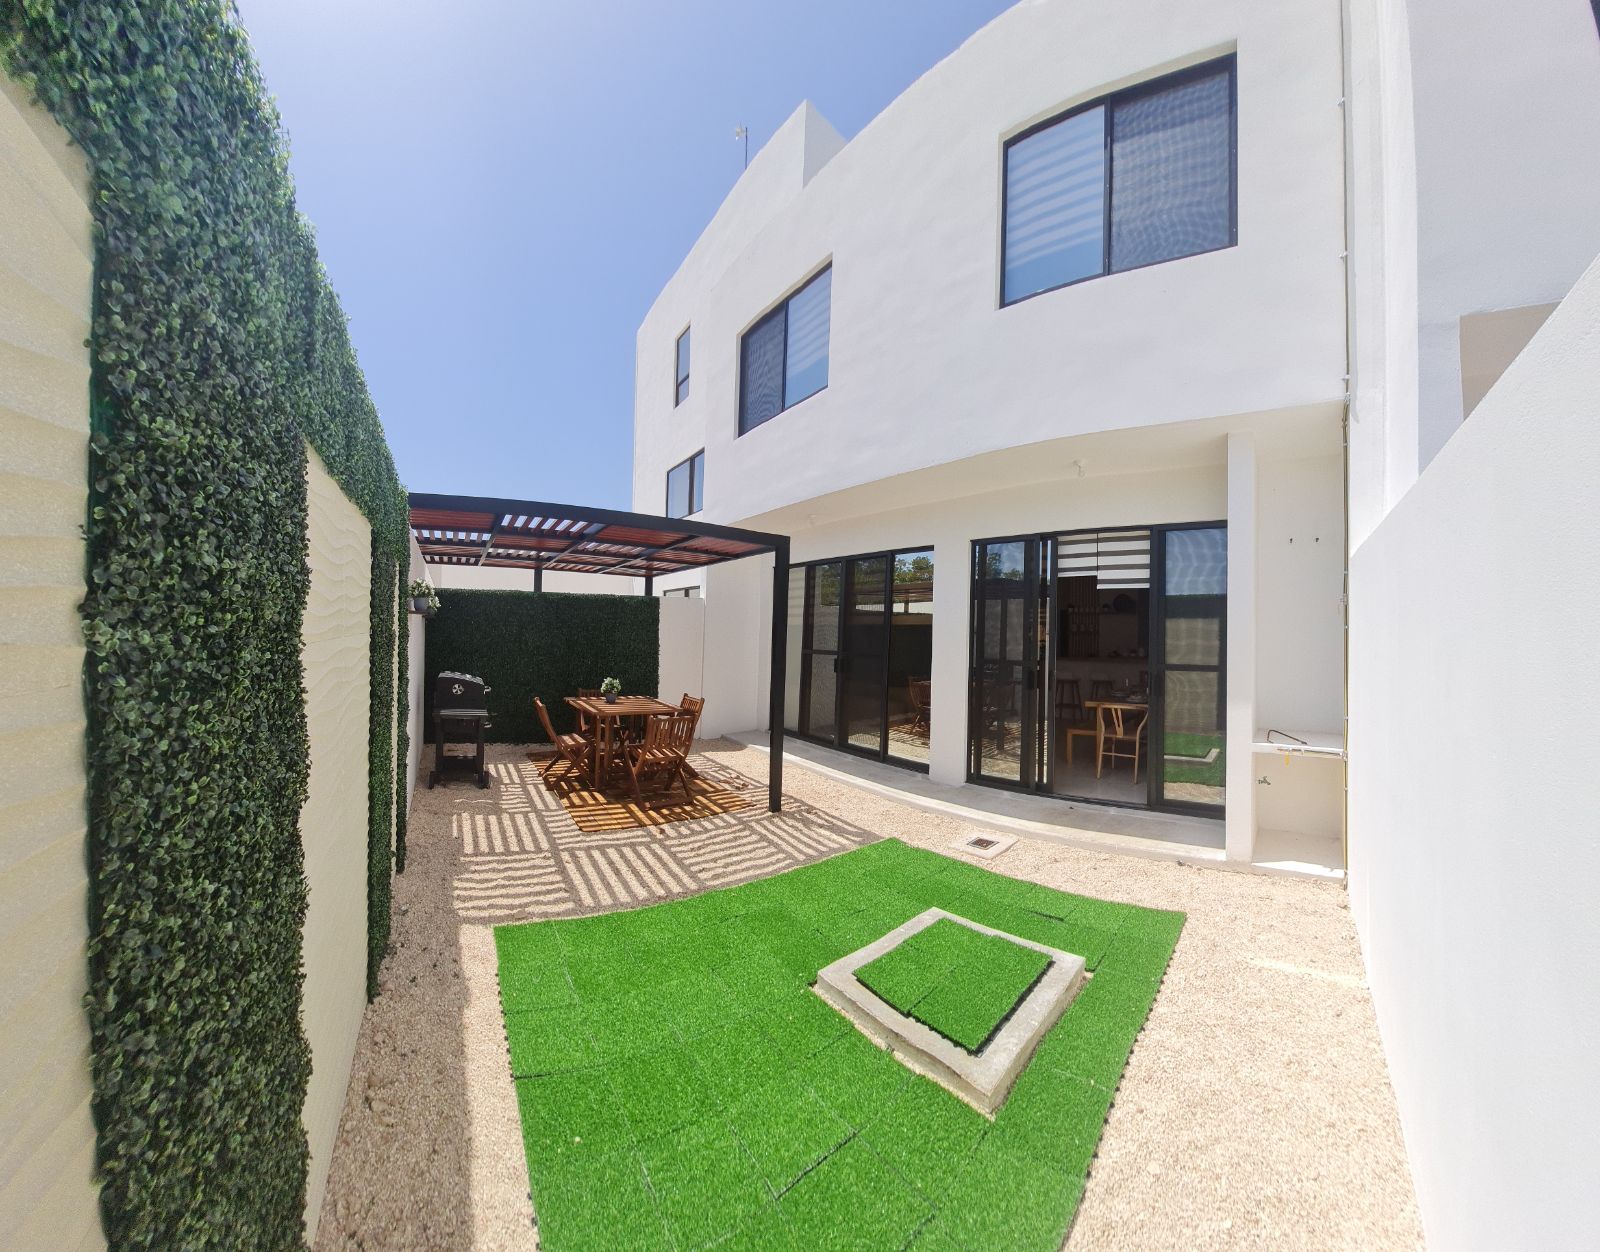 House with solar panels, garden with barbecue, club house with sports fields and pool, playground for children and more in Allergranzza gate